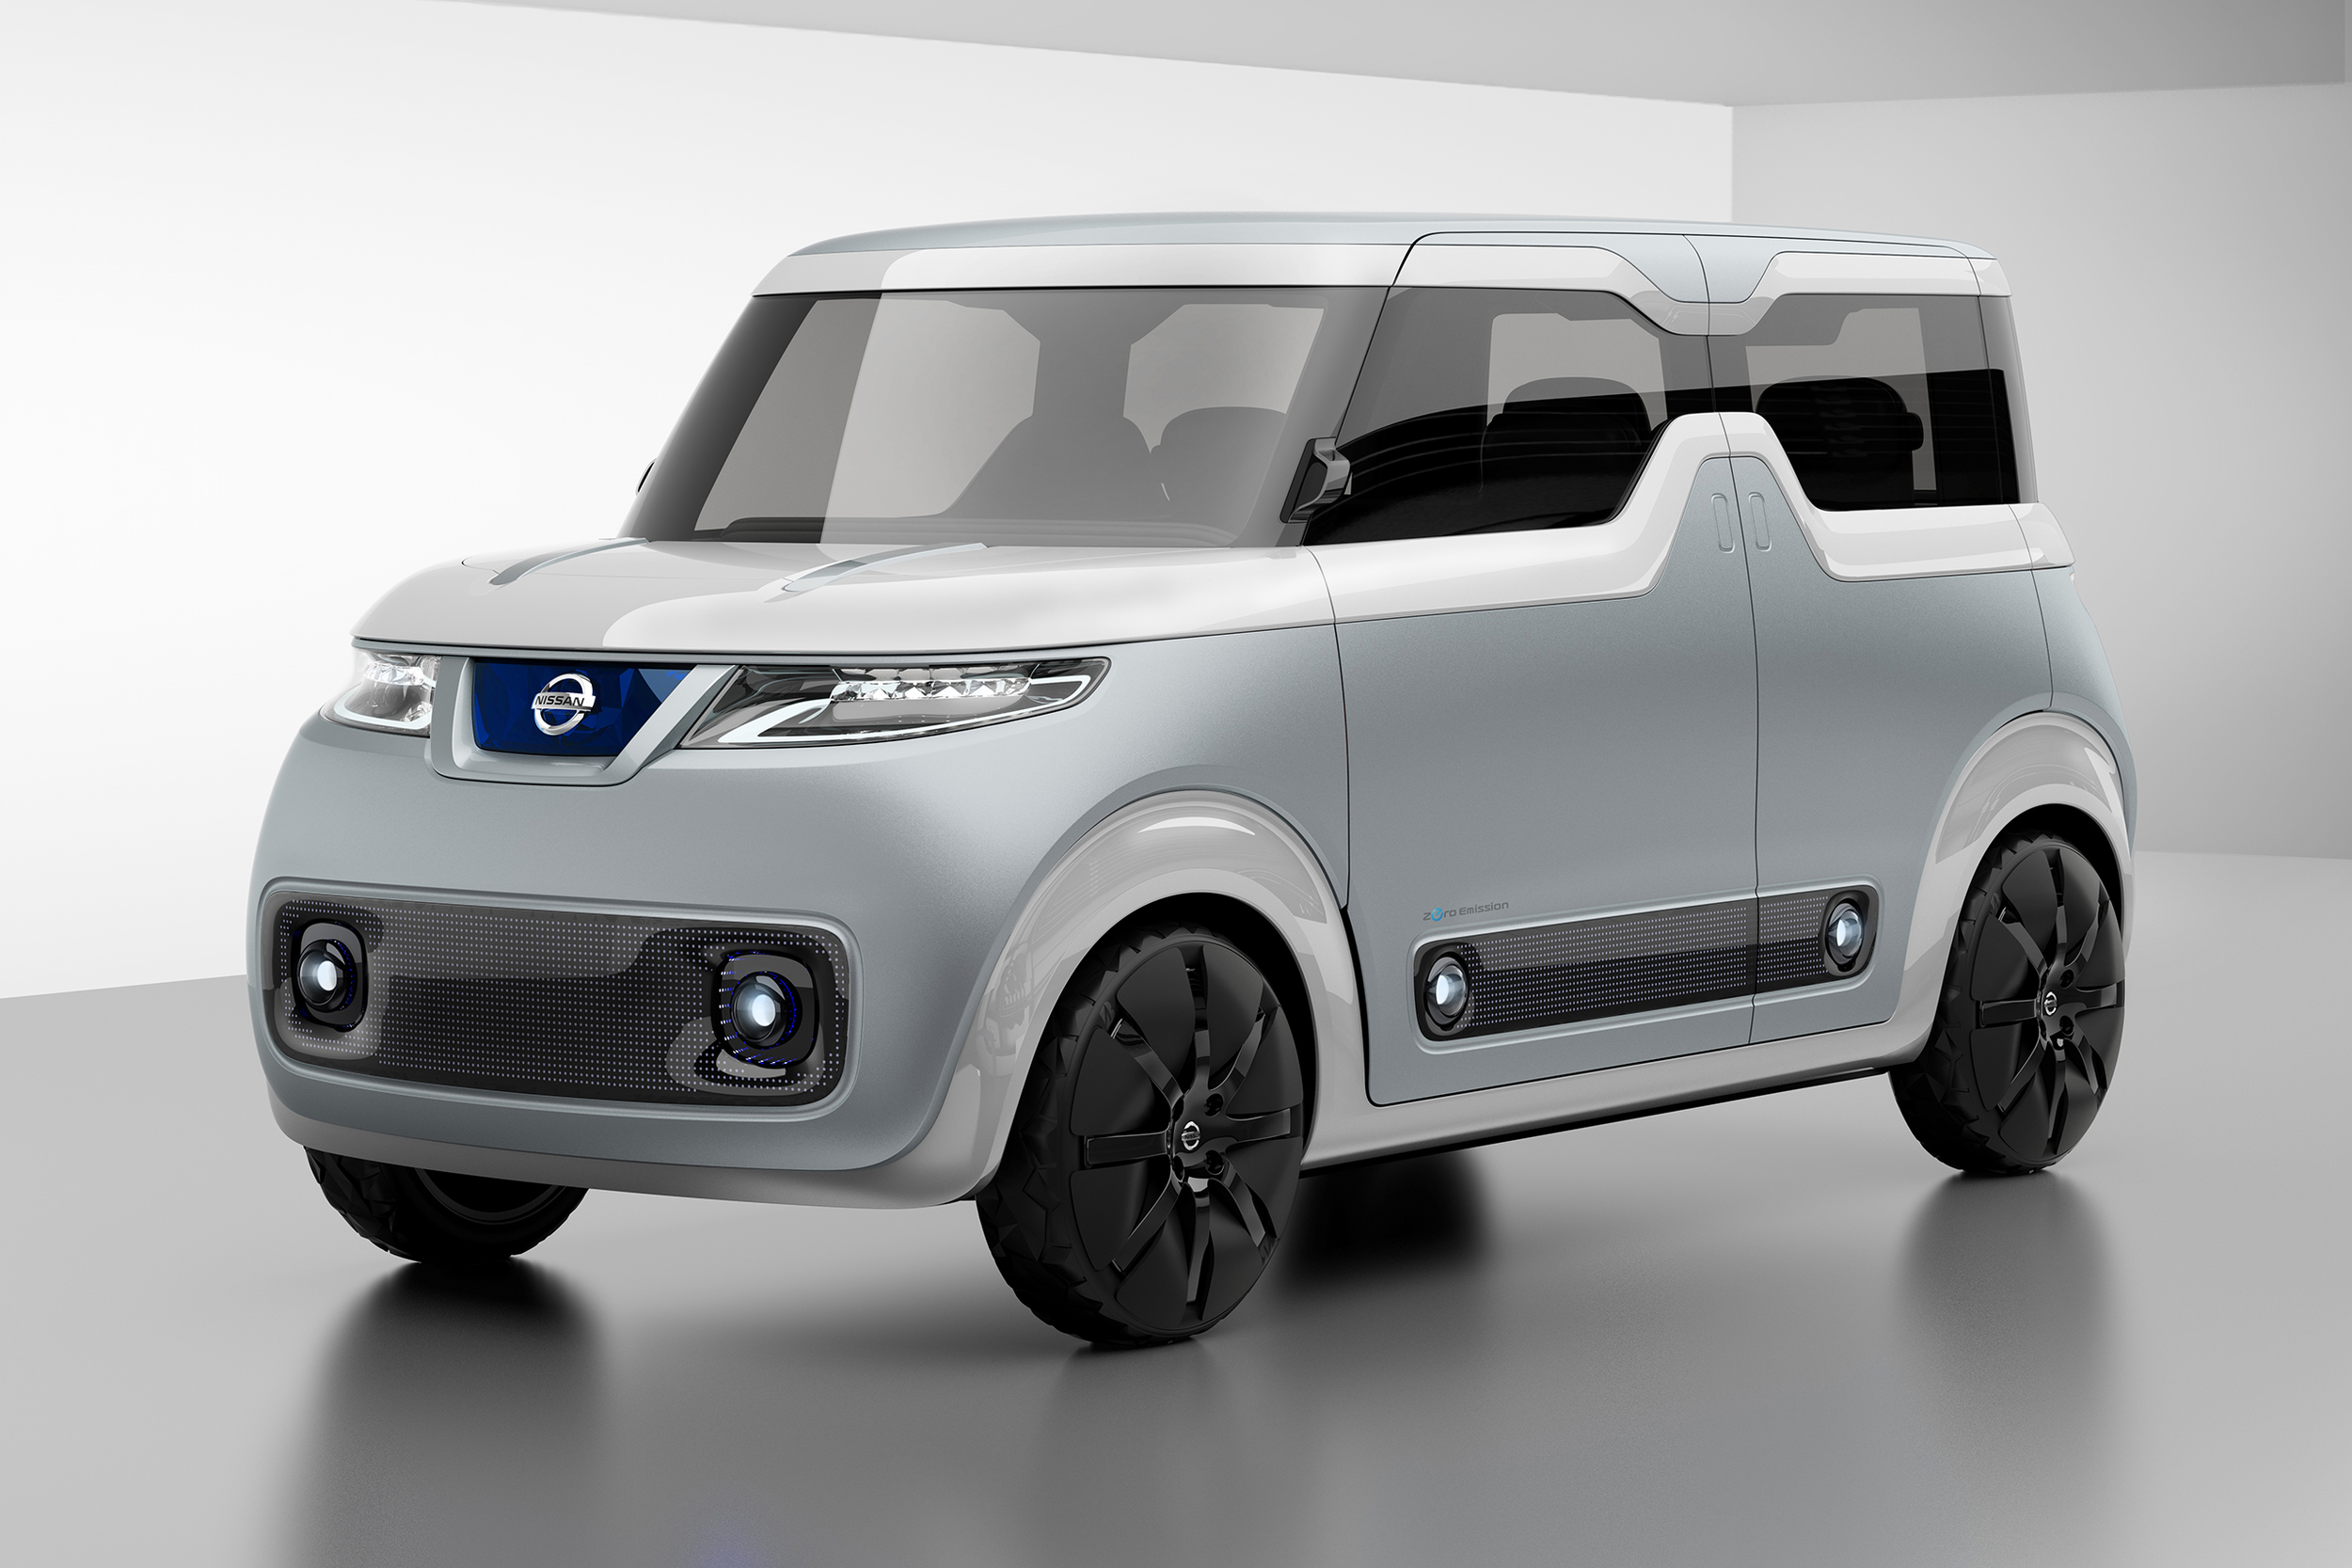 Nissan Teatro for Dayz set to debut in Tokyo